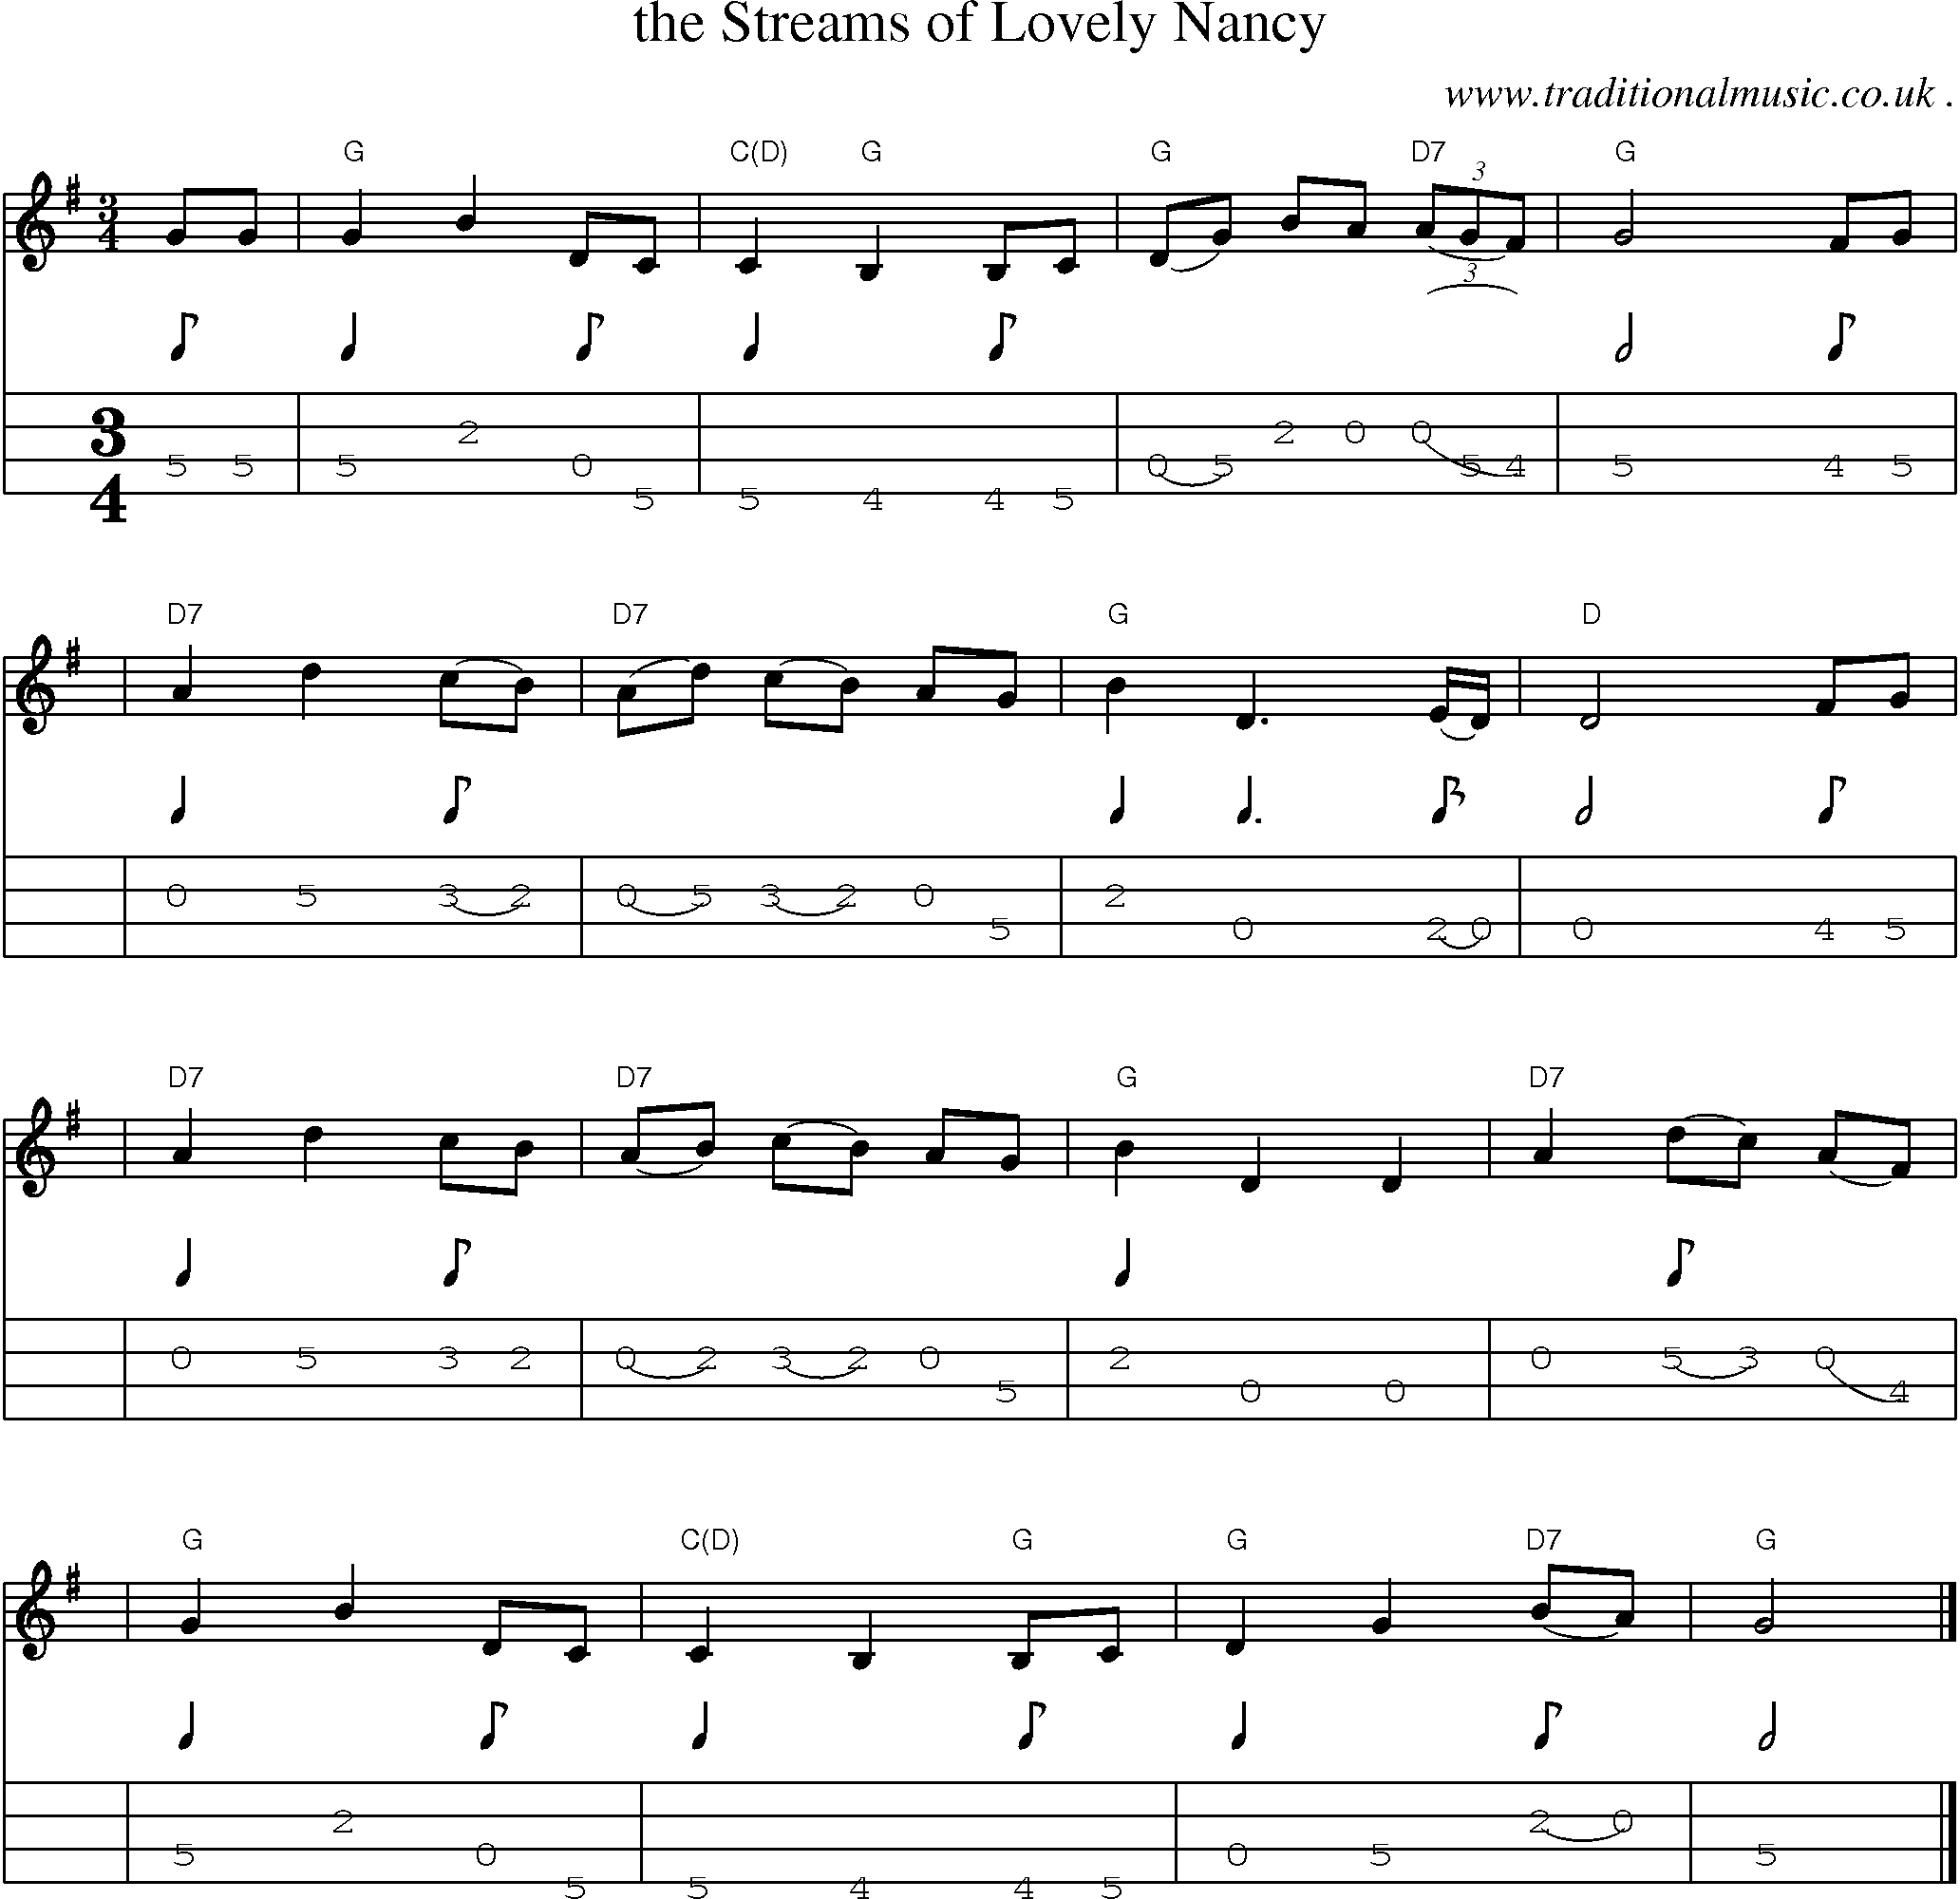 Sheet-music  score, Chords and Mandolin Tabs for The Streams Of Lovely Nancy